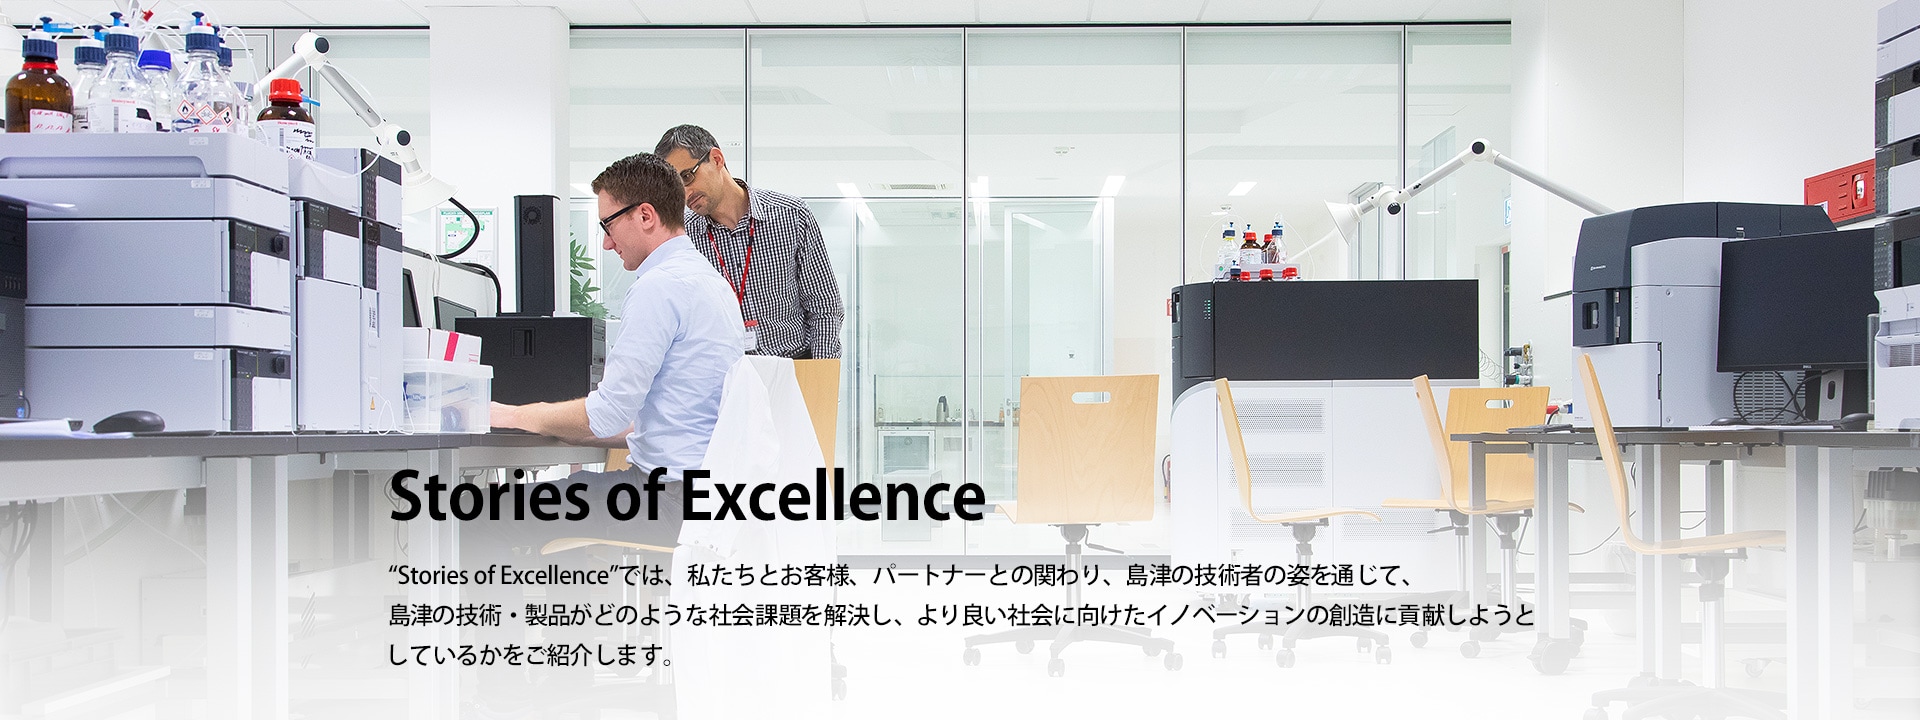 「Stories of Excellence」